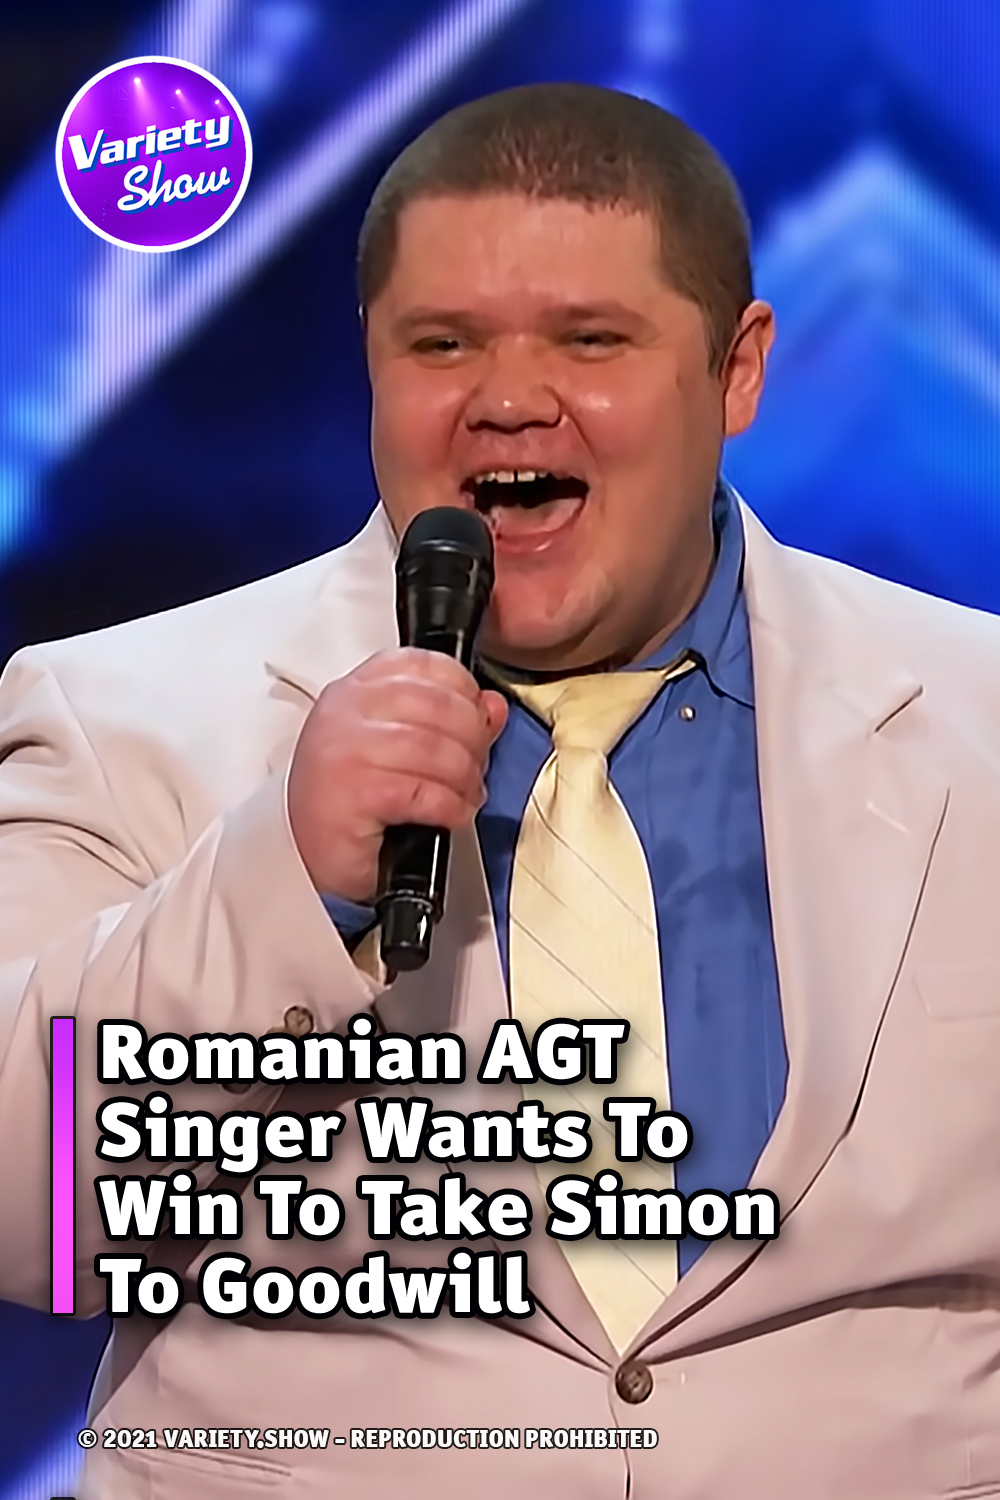 Romanian AGT Singer Wants To Win To Take Simon To Goodwill